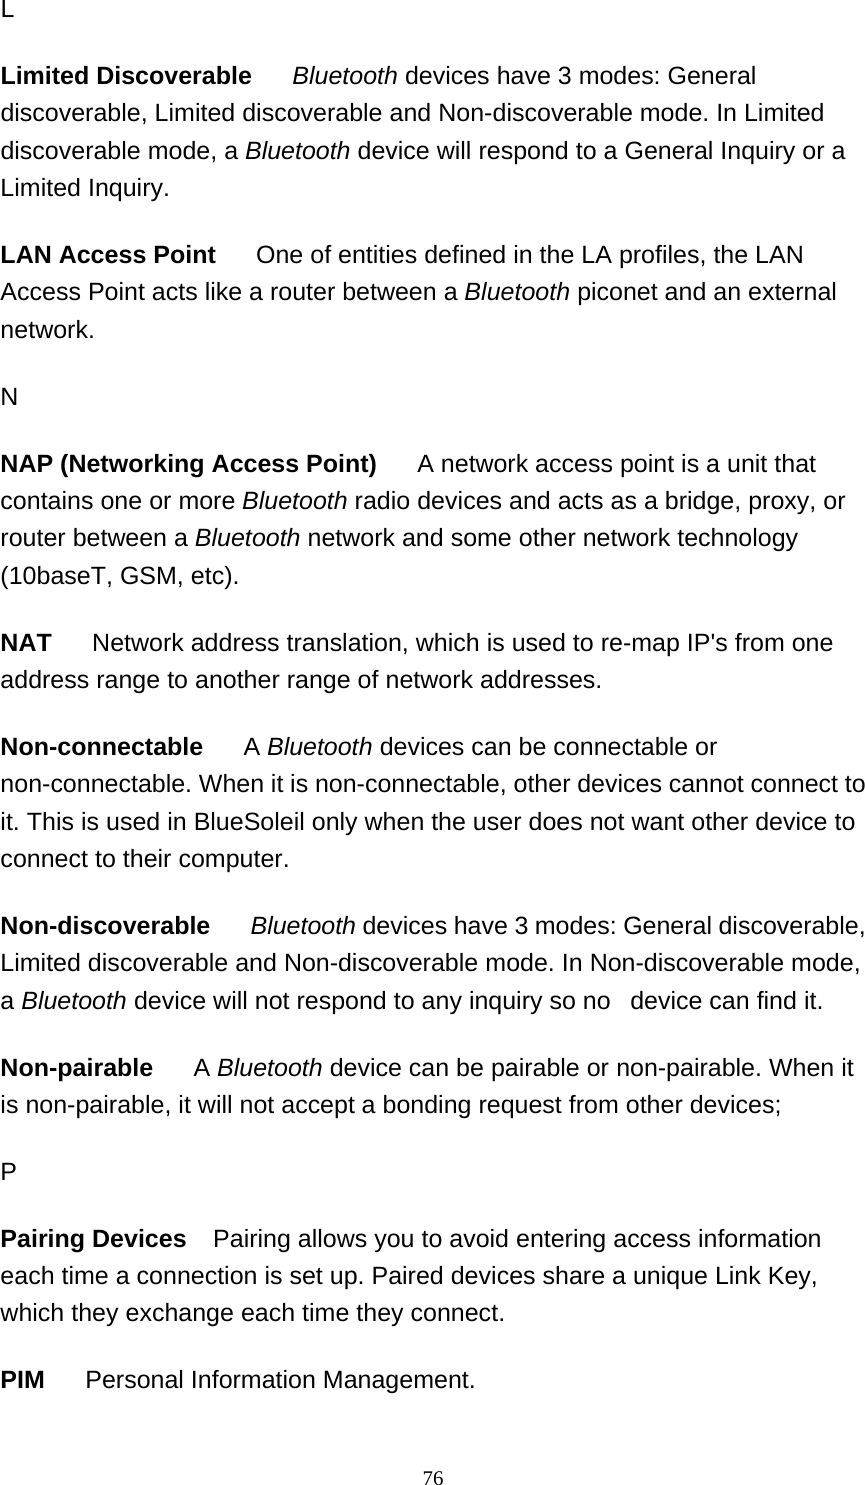   76L Limited Discoverable     Bluetooth devices have 3 modes: General discoverable, Limited discoverable and Non-discoverable mode. In Limited discoverable mode, a Bluetooth device will respond to a General Inquiry or a Limited Inquiry.  LAN Access Point      One of entities defined in the LA profiles, the LAN Access Point acts like a router between a Bluetooth piconet and an external network.  N NAP (Networking Access Point)      A network access point is a unit that contains one or more Bluetooth radio devices and acts as a bridge, proxy, or router between a Bluetooth network and some other network technology (10baseT, GSM, etc). NAT      Network address translation, which is used to re-map IP&apos;s from one address range to another range of network addresses.  Non-connectable     A Bluetooth devices can be connectable or non-connectable. When it is non-connectable, other devices cannot connect to it. This is used in BlueSoleil only when the user does not want other device to connect to their computer.  Non-discoverable     Bluetooth devices have 3 modes: General discoverable, Limited discoverable and Non-discoverable mode. In Non-discoverable mode, a Bluetooth device will not respond to any inquiry so no   device can find it.  Non-pairable     A Bluetooth device can be pairable or non-pairable. When it is non-pairable, it will not accept a bonding request from other devices; P Pairing Devices    Pairing allows you to avoid entering access information each time a connection is set up. Paired devices share a unique Link Key, which they exchange each time they connect.   PIM      Personal Information Management.  